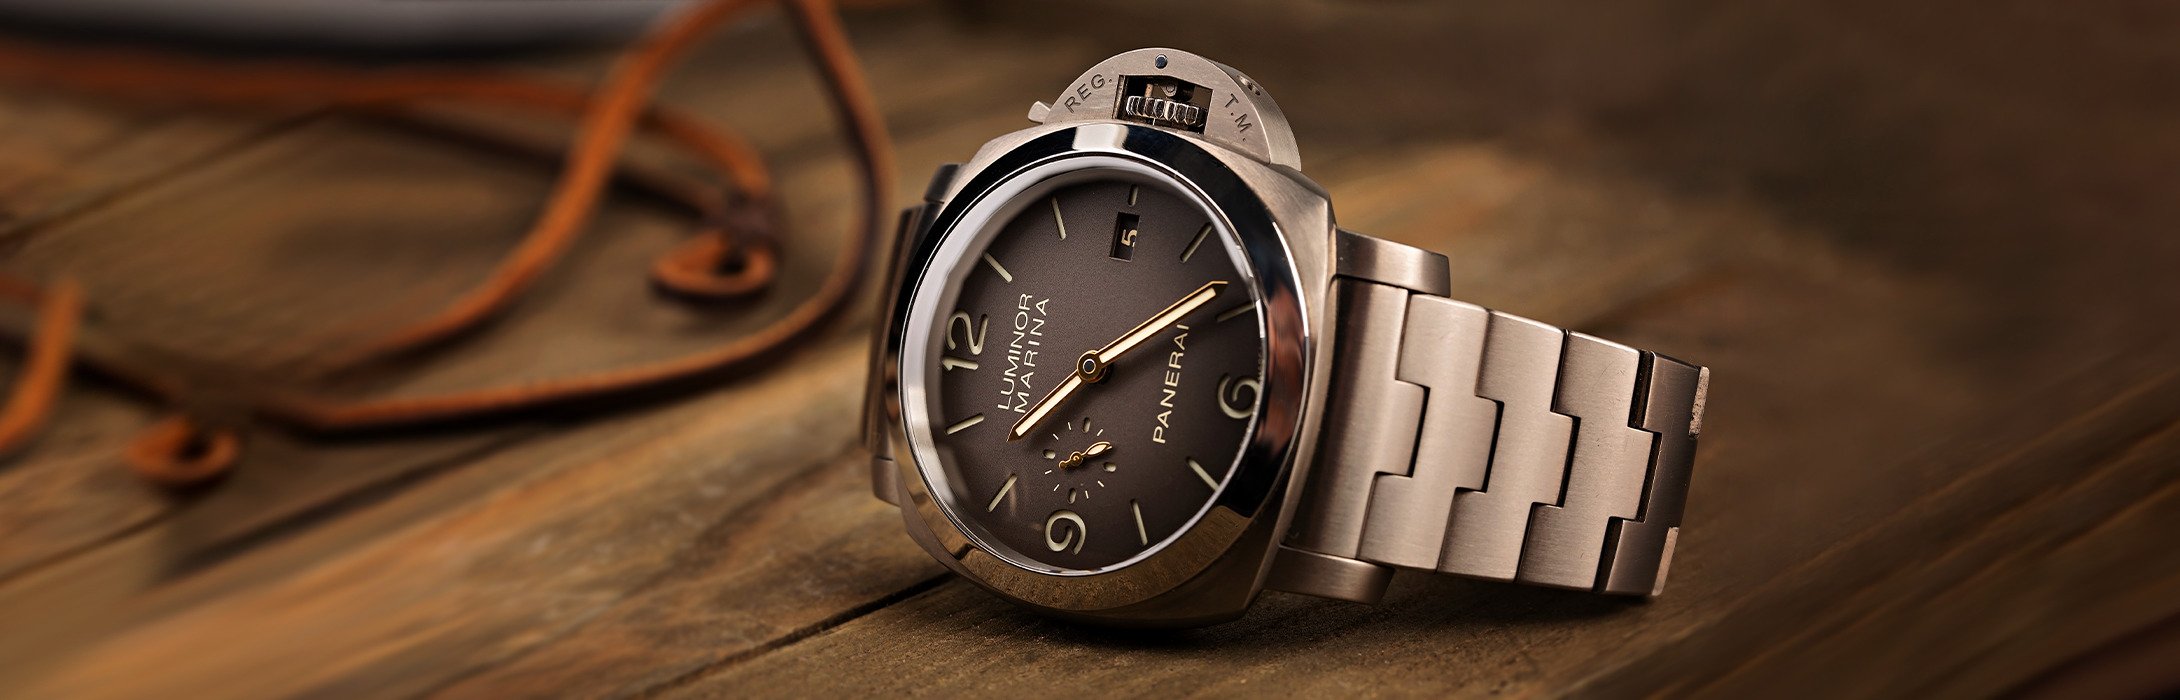 Panerai - Luminor 1950 Tuttonero – Watch Brands Direct - Luxury Watches at  the Largest Discounts